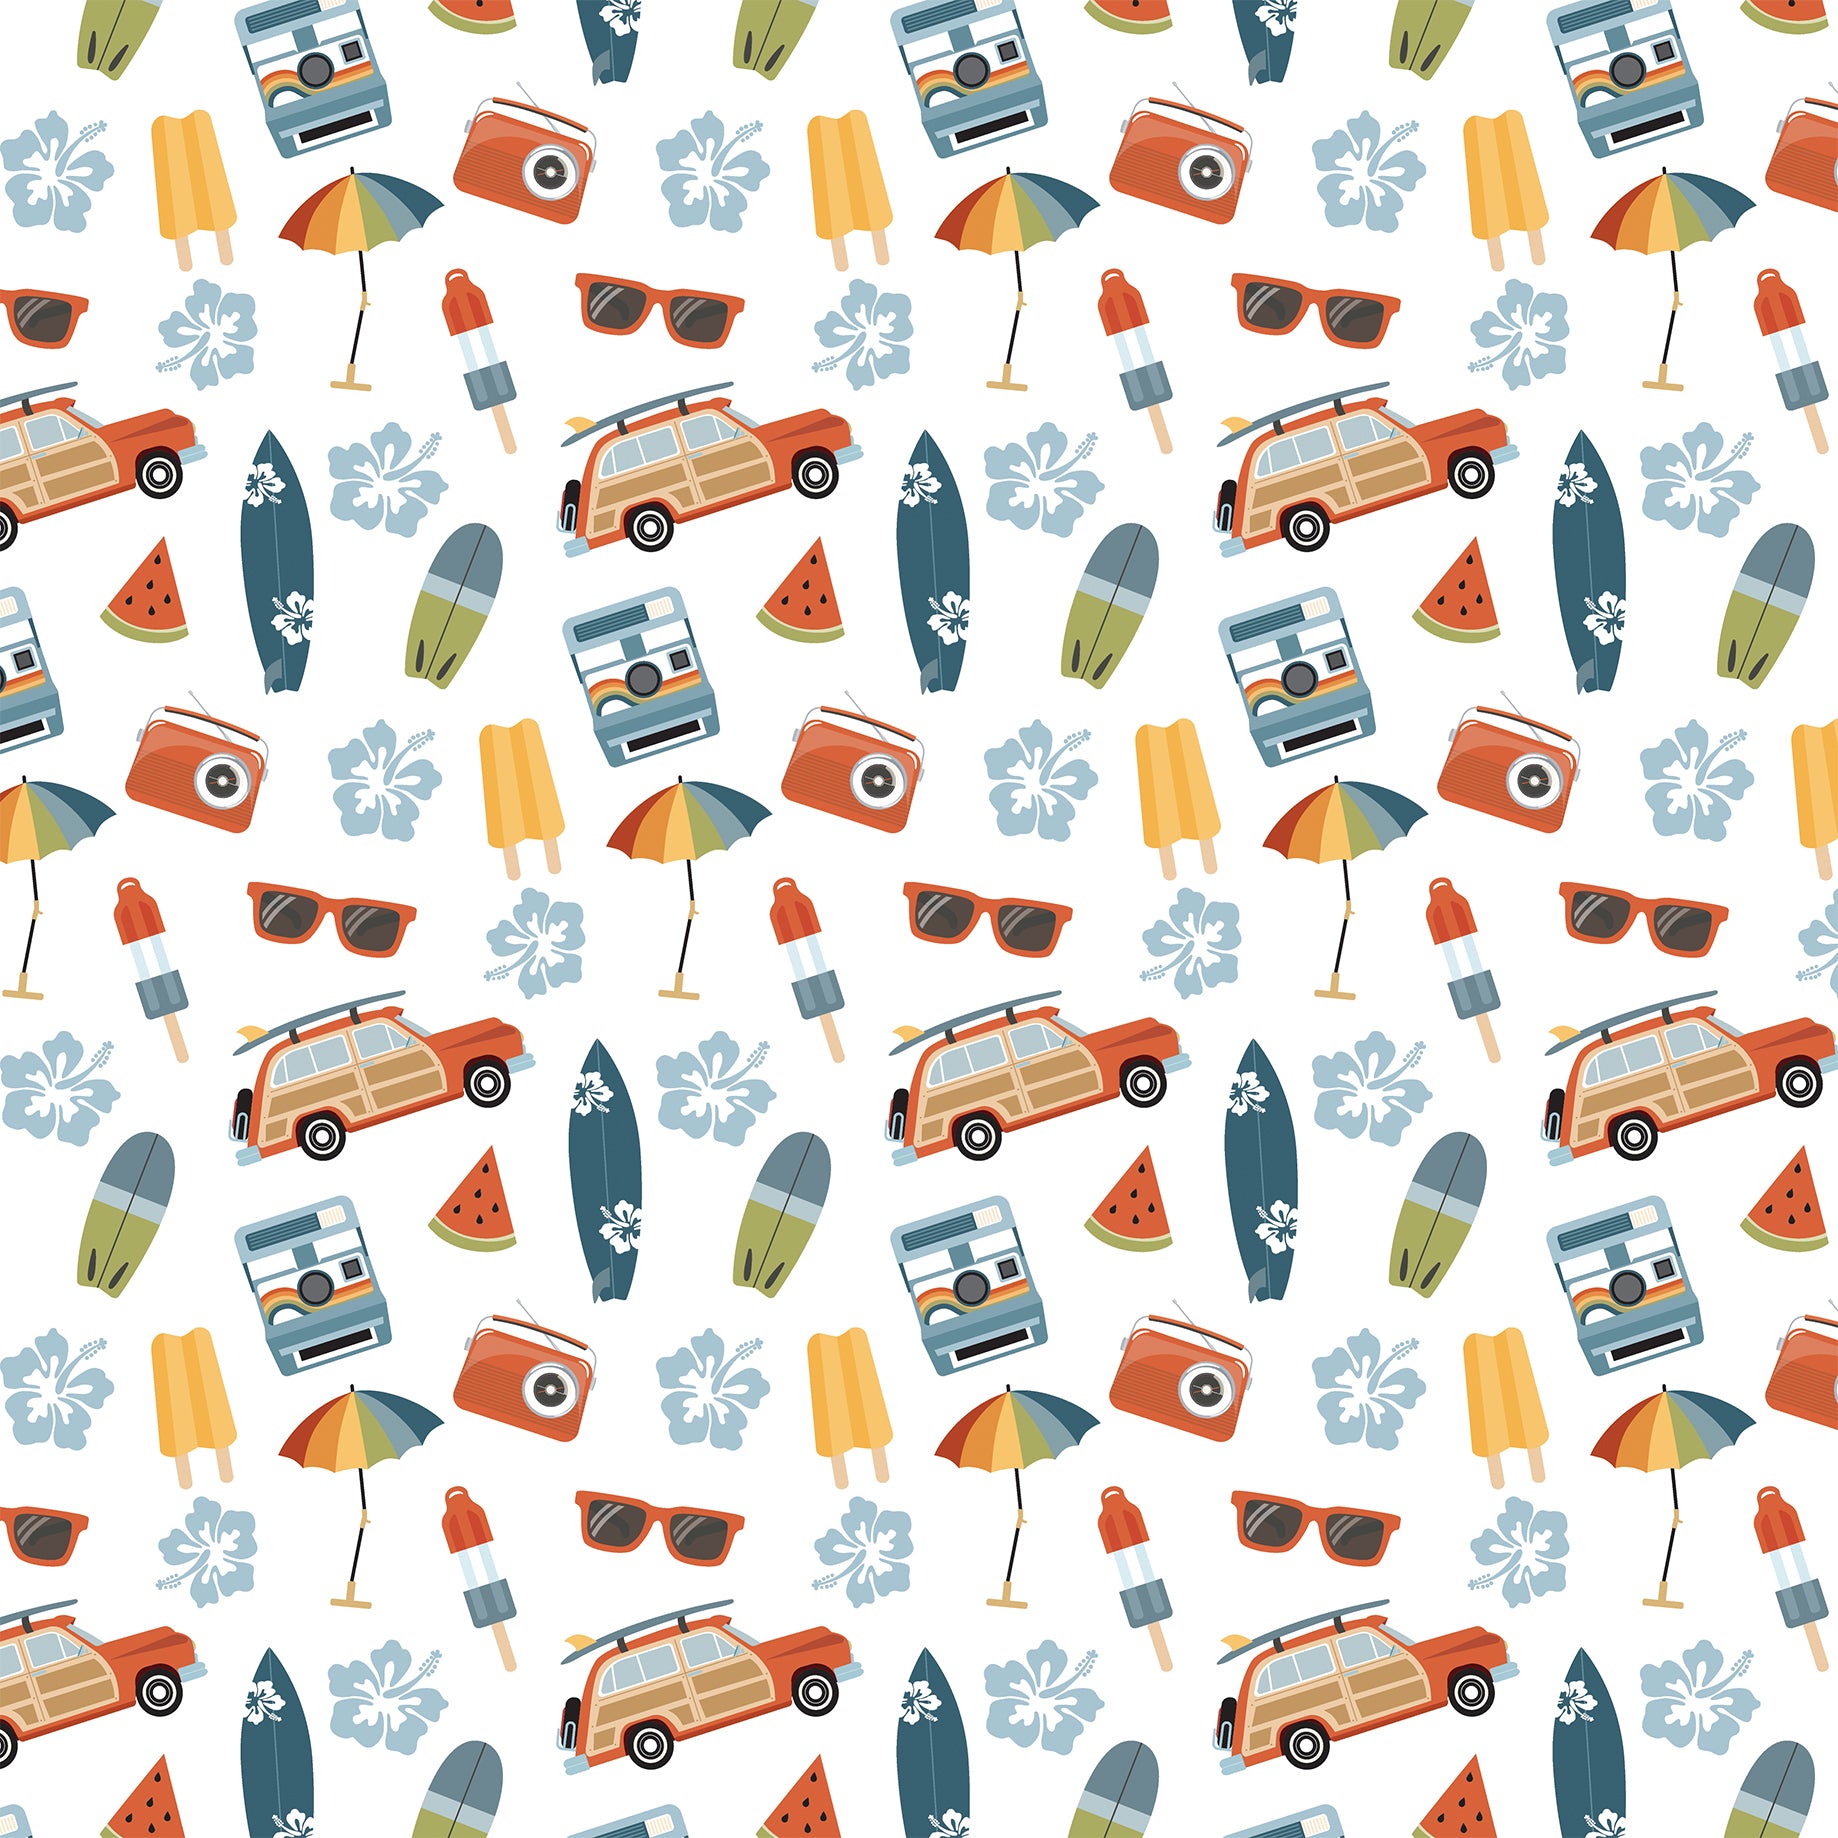 Summer Vibes Collection Heat Wave Essentials 12 x 12 Double-Sided Scrapbook Paper by Echo Park Paper